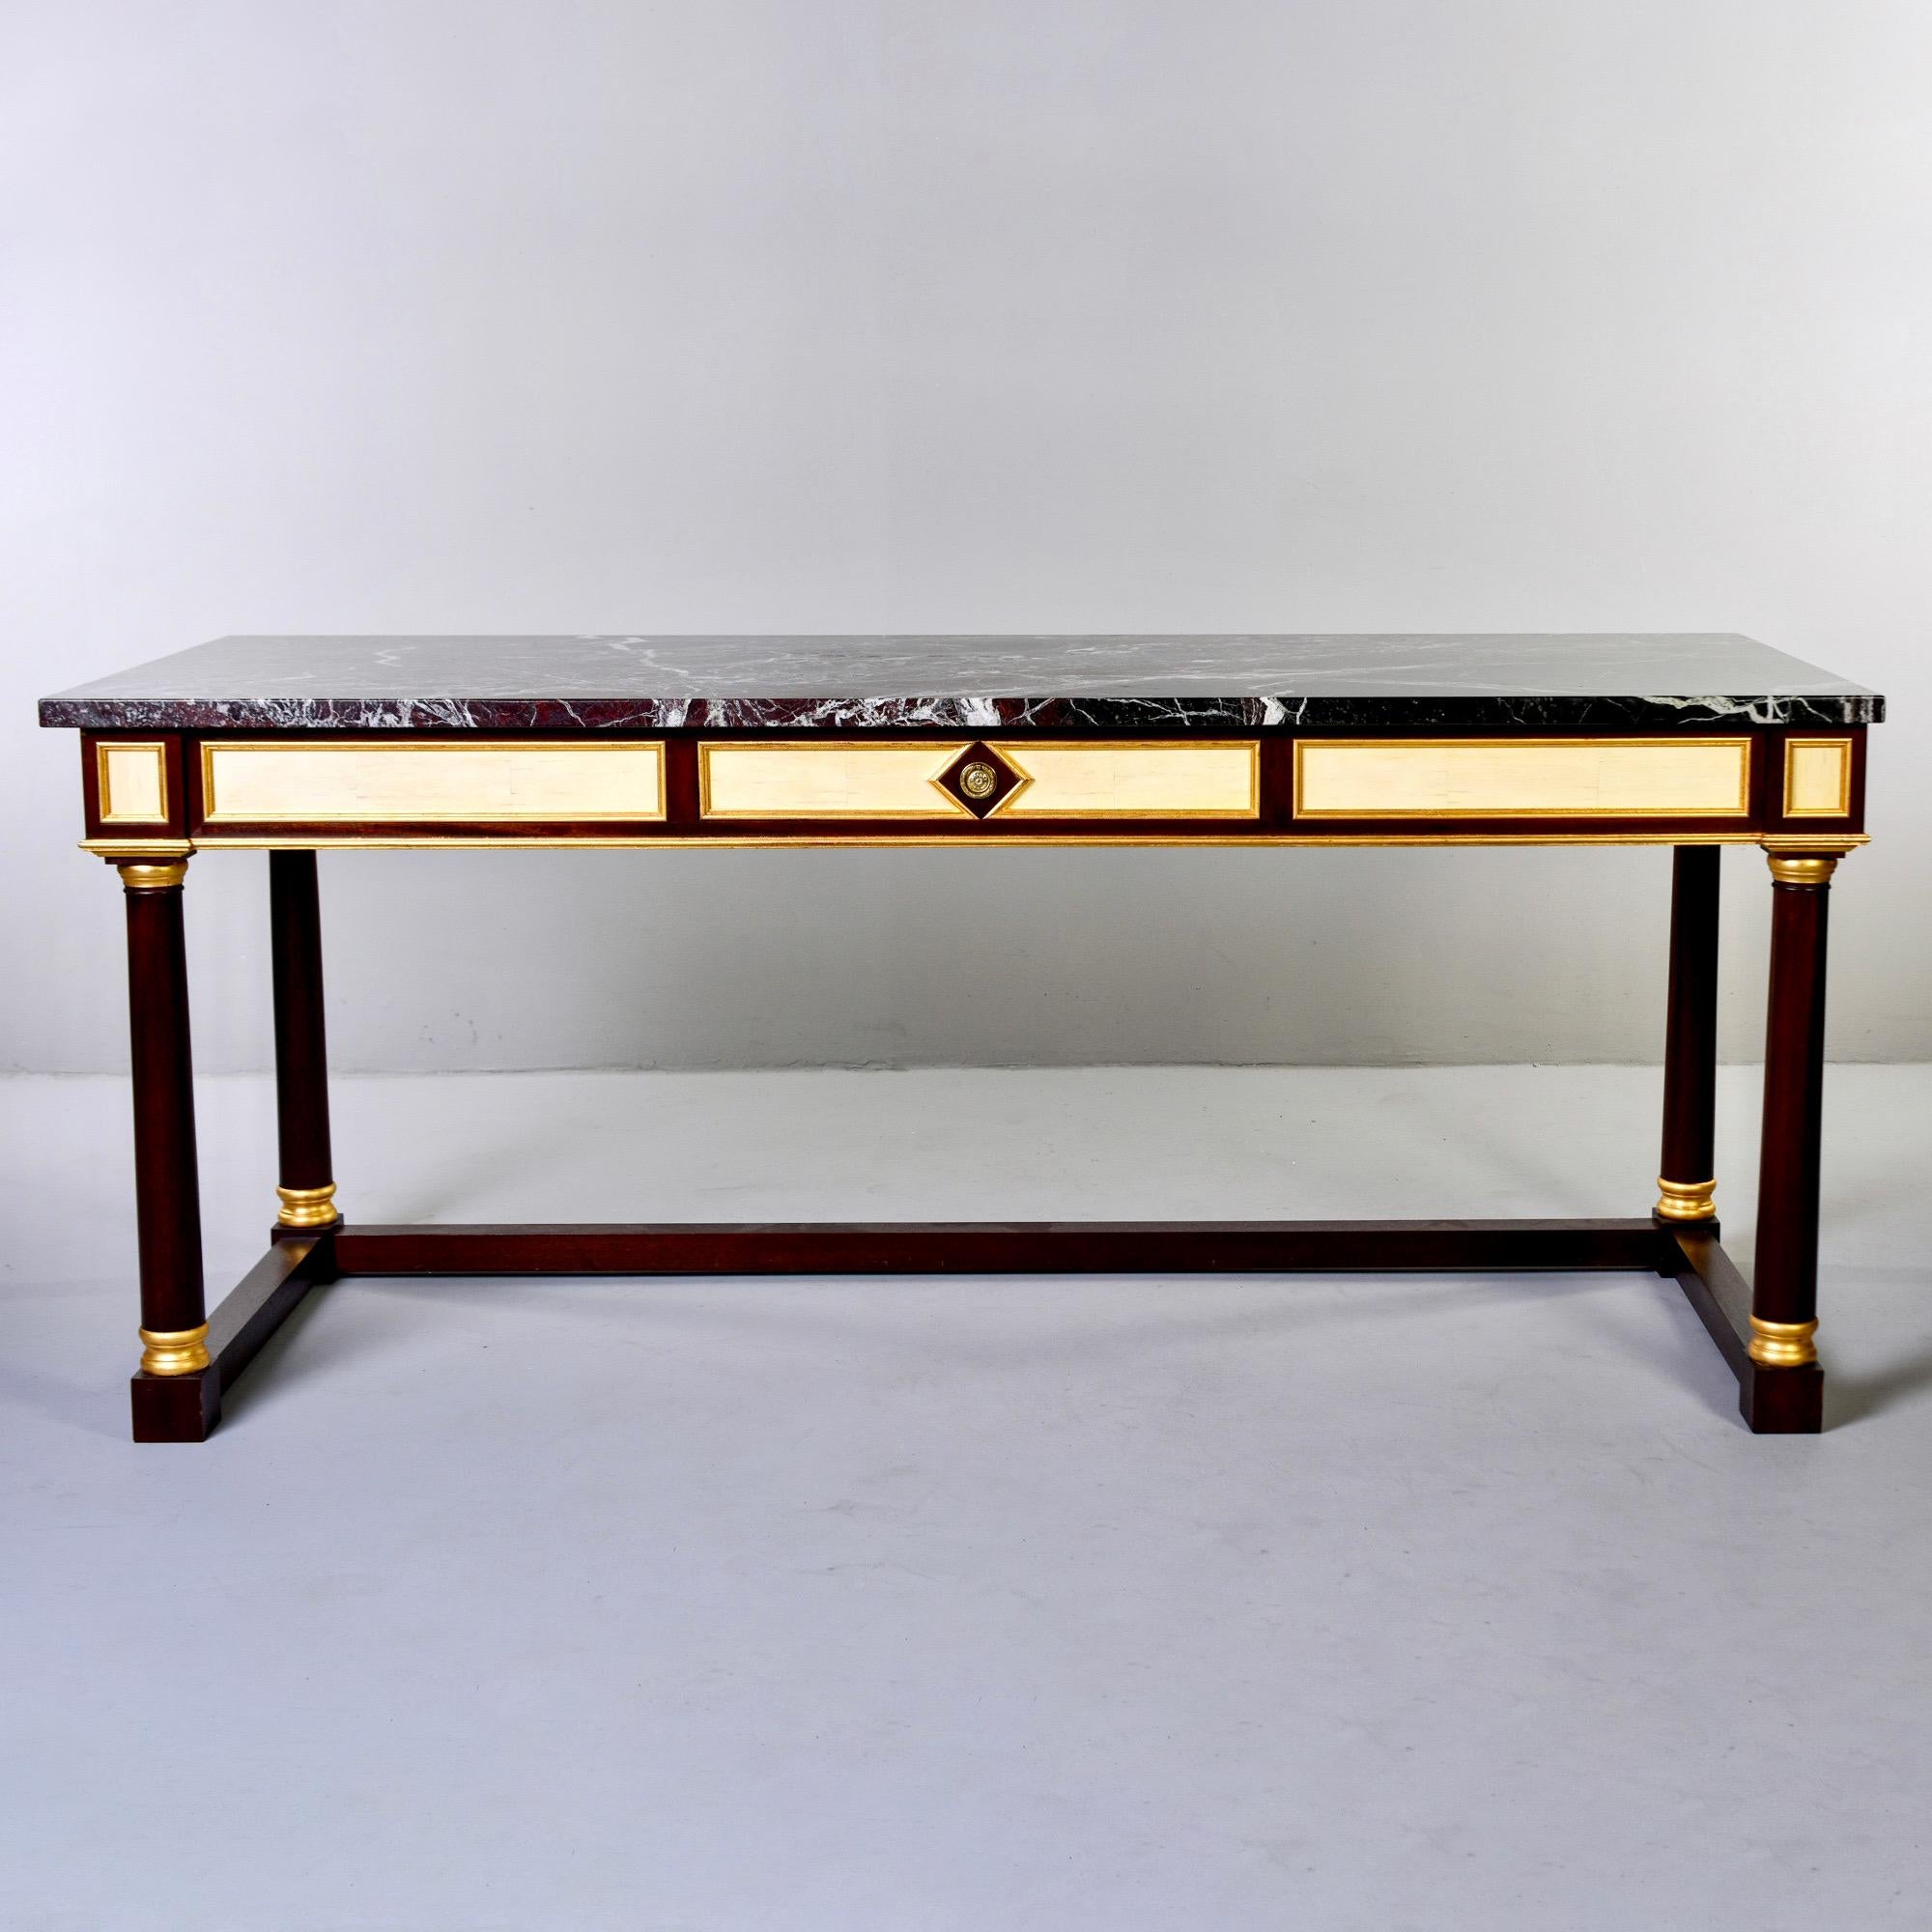 Custom made neoclassical writing desk / console designed by Keith Irvine - decorator for Jackie Onassis, Rex Harrison, Diana Ross and one of founding partners of Clarence House. Desk has mahogany frame with painted and gilded finishes, a dark wine